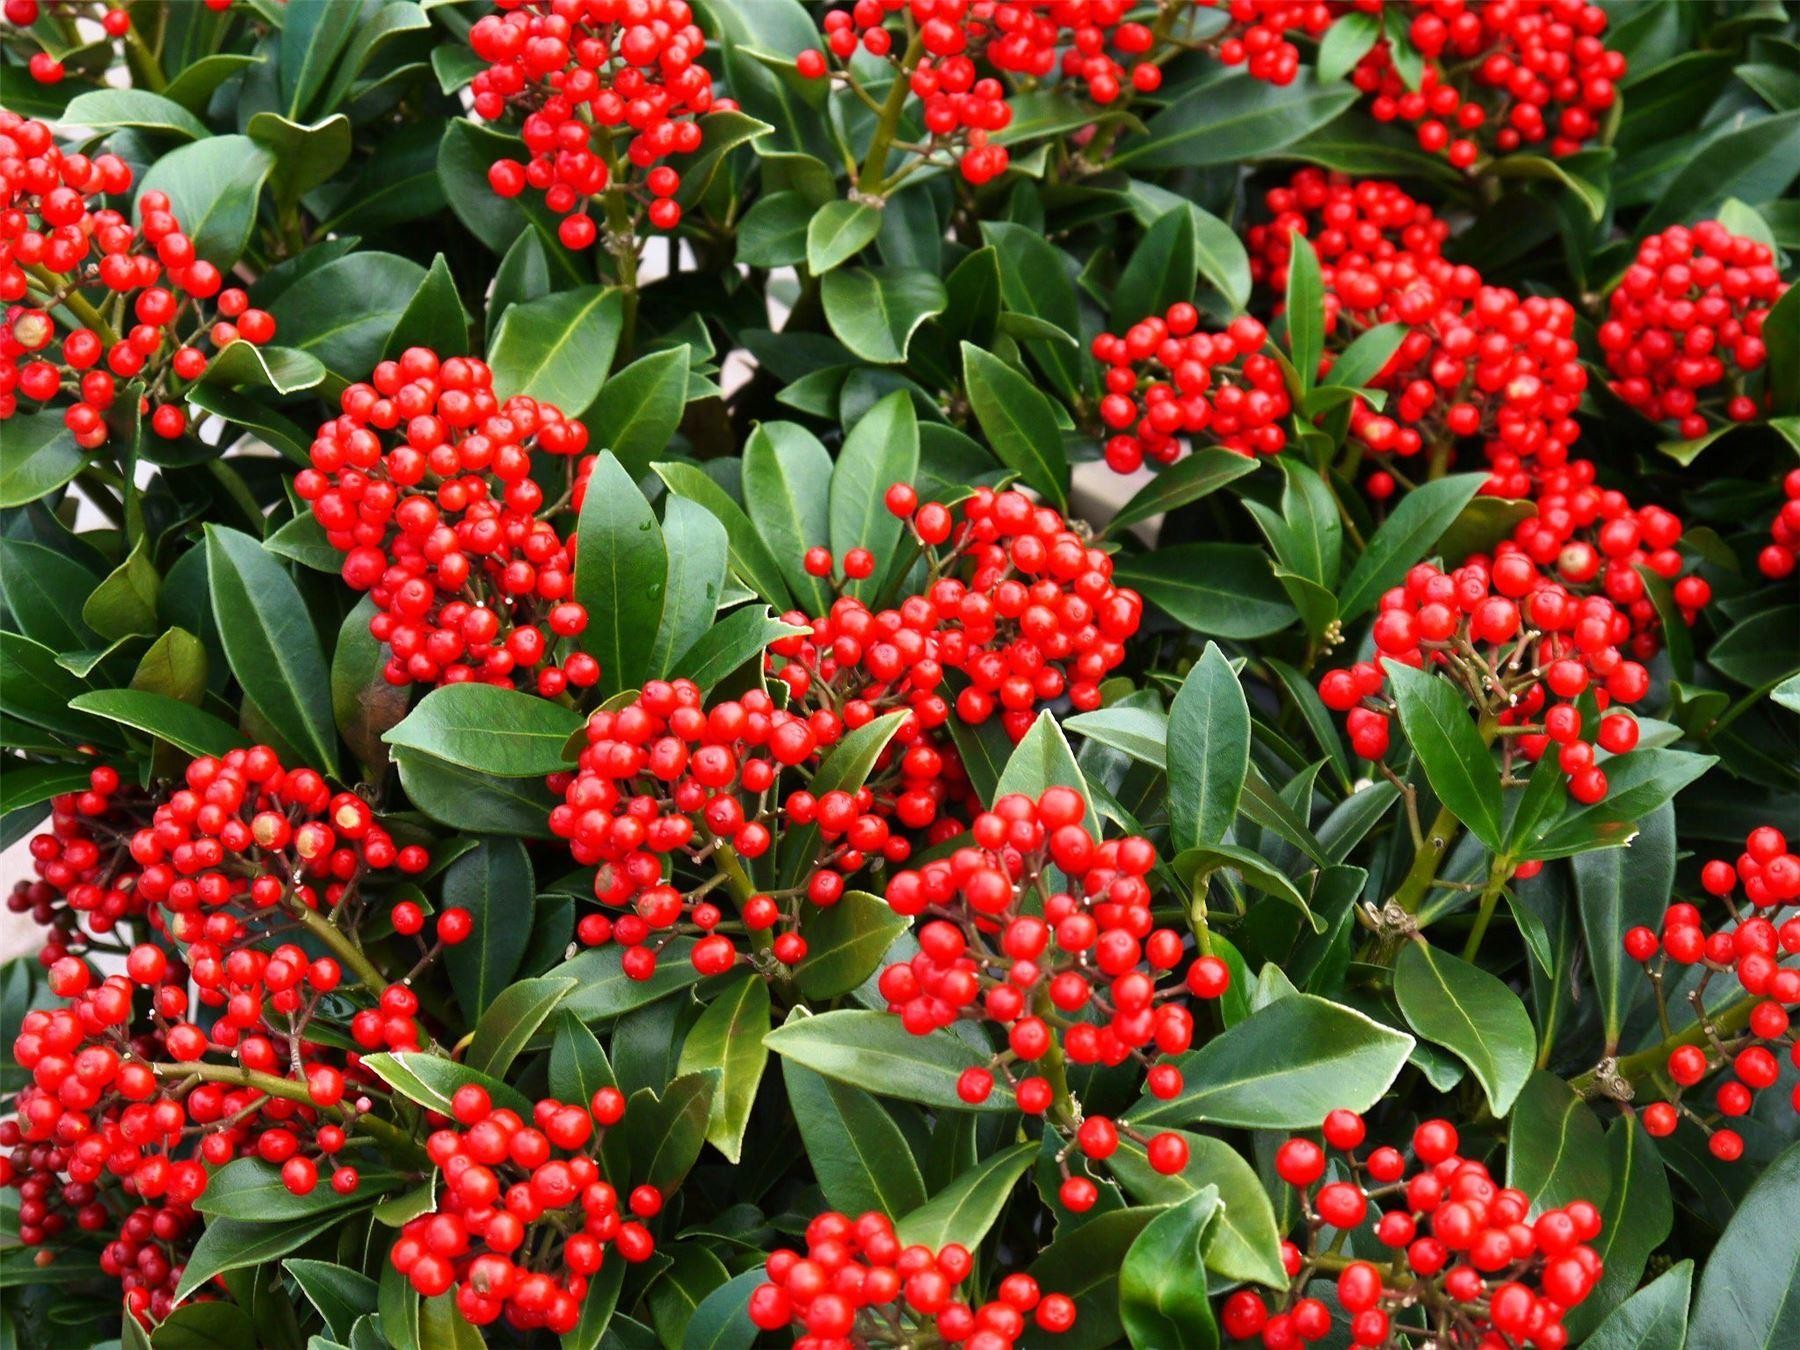 skimmia japonica plant shrubs specimen autumn colour plants garden beautiful berries red deal special perrywood